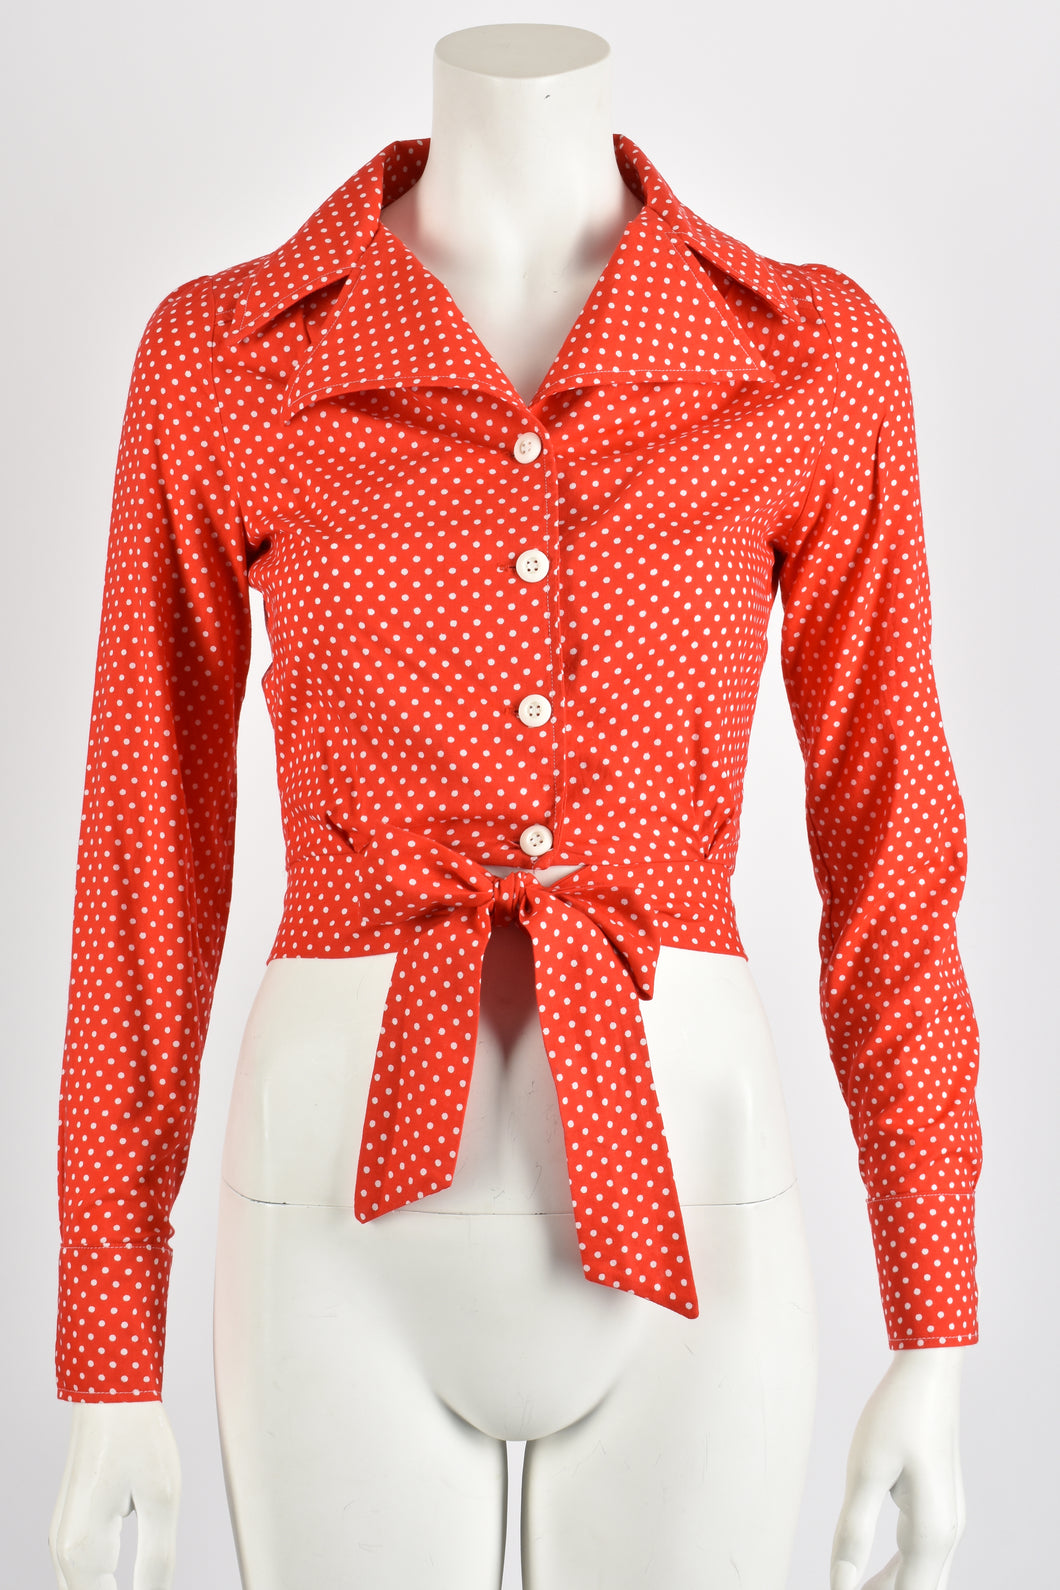 DARLING HAGER 1970s red spotty shirt XS-S